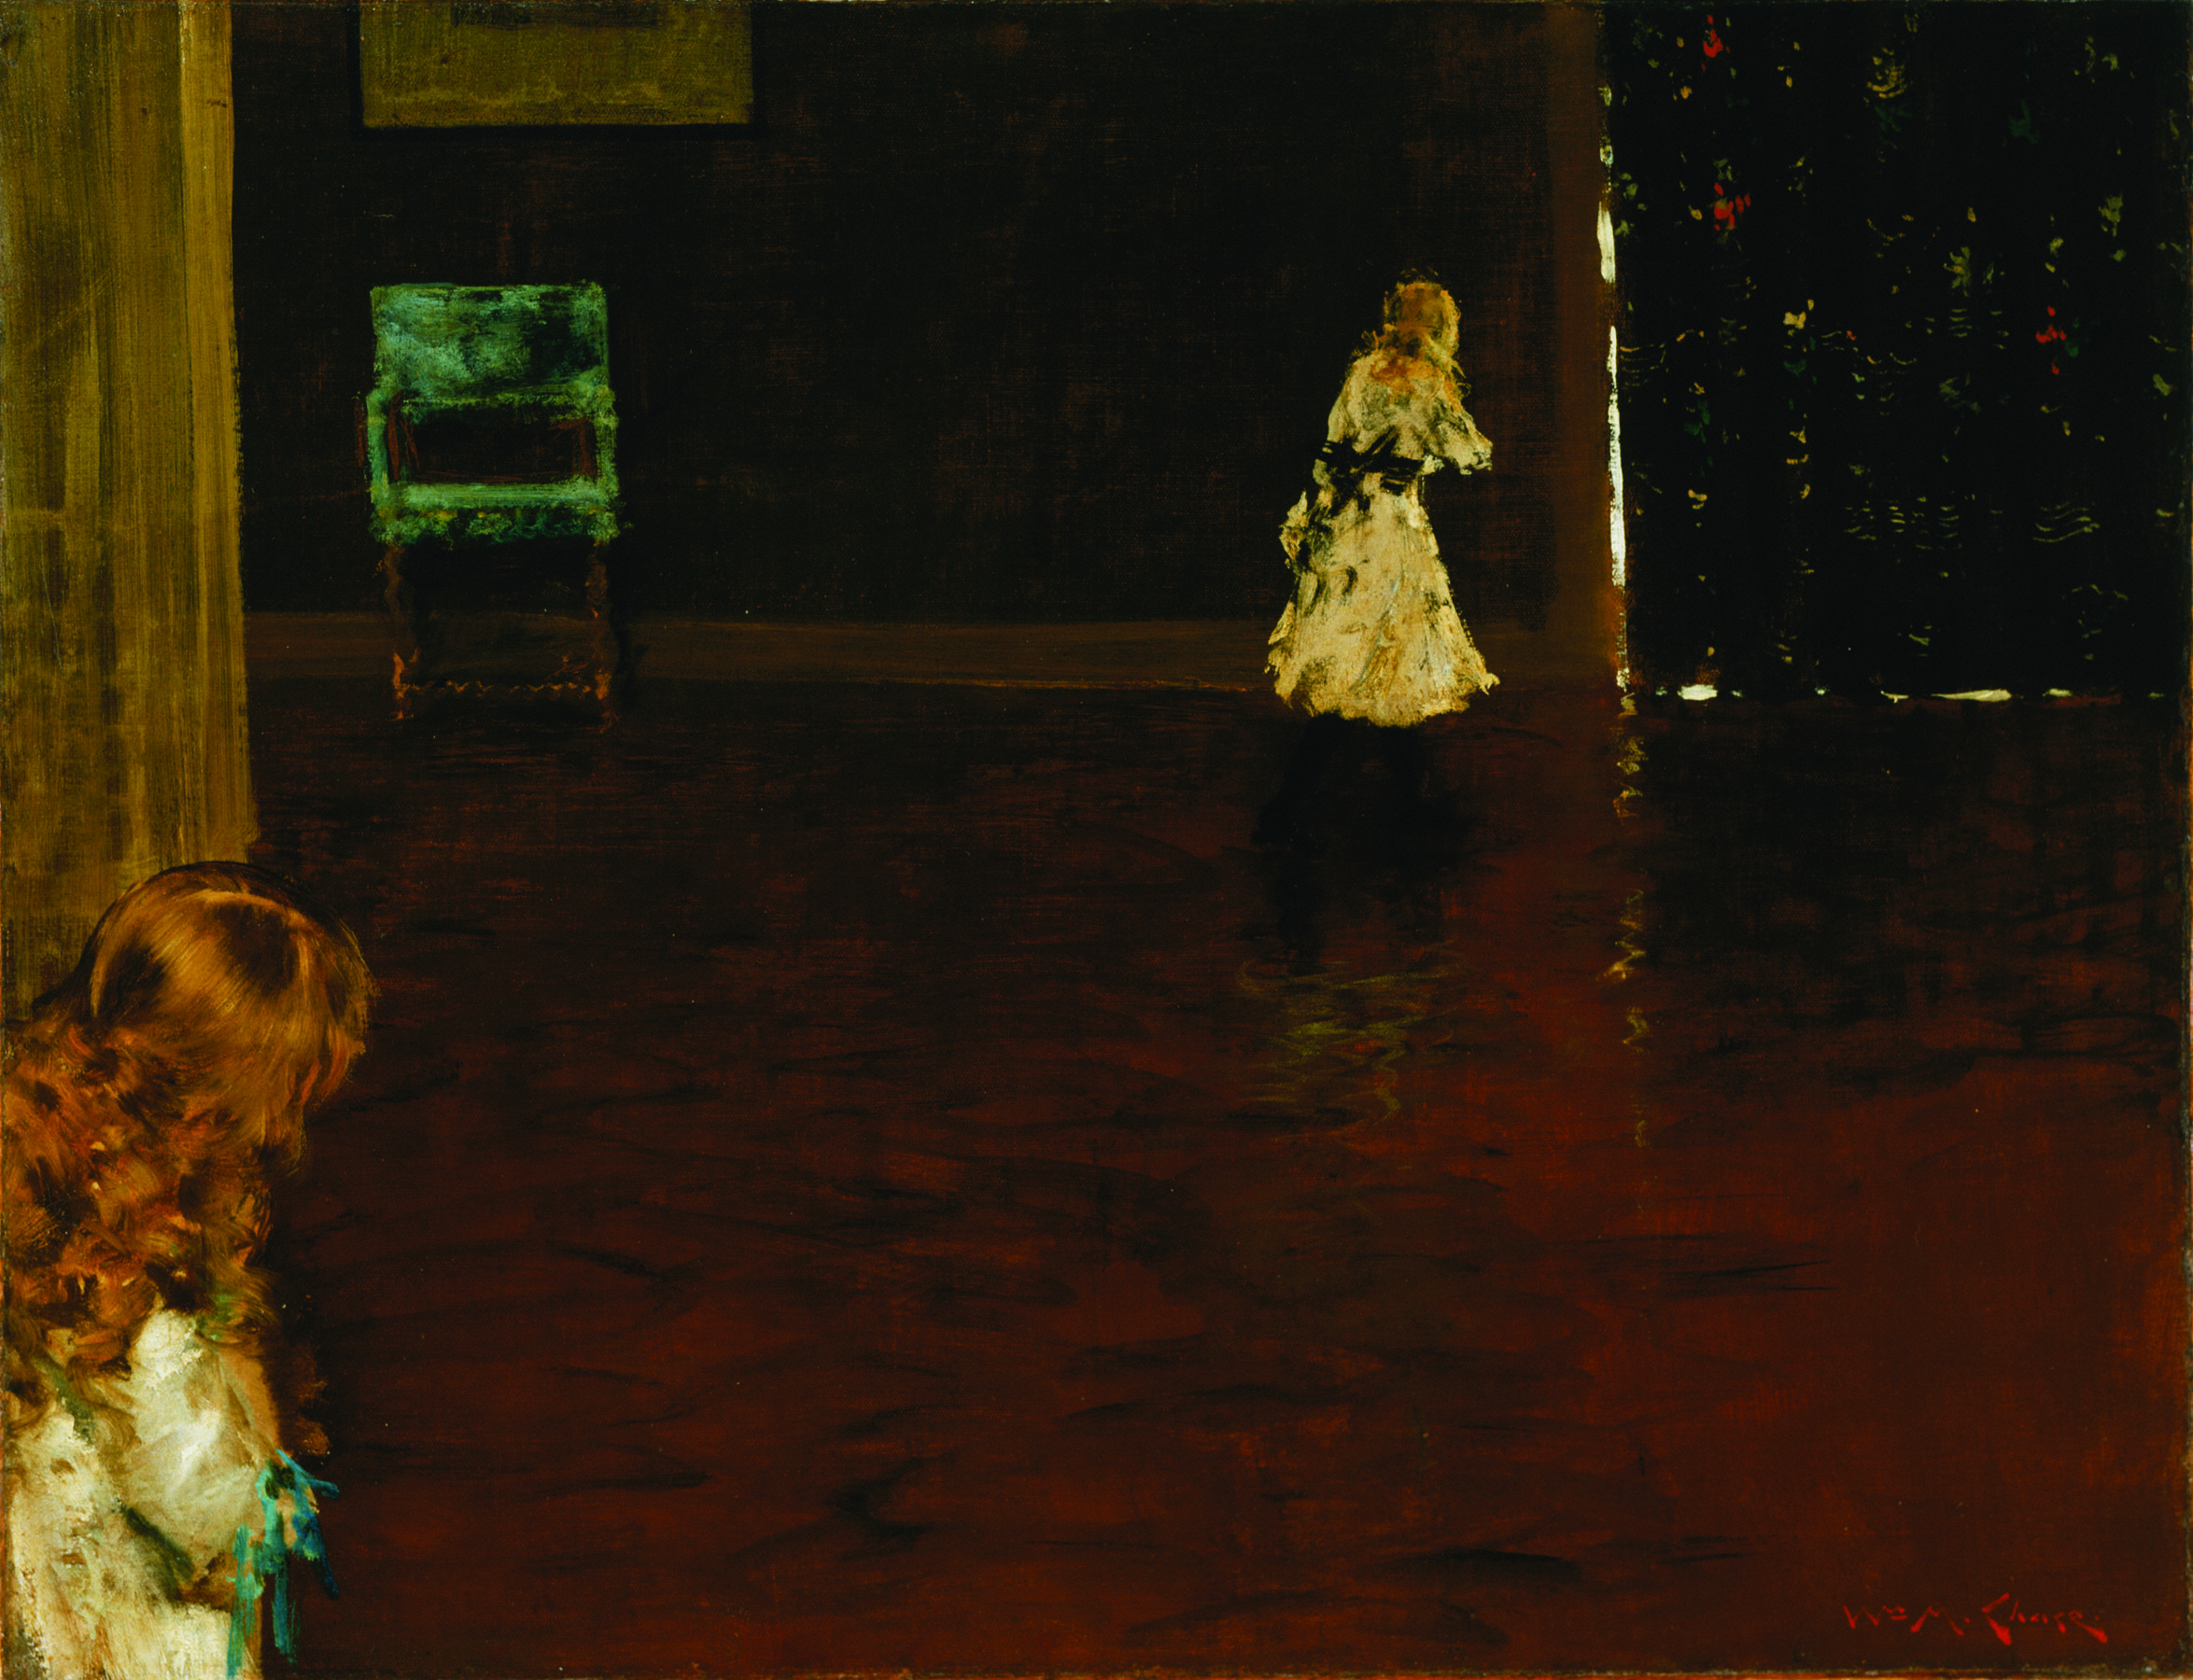 Hide and Seek by William Merritt Chase  - 1888 - 27 5/8 x 35 7/8 in The Phillips Collection